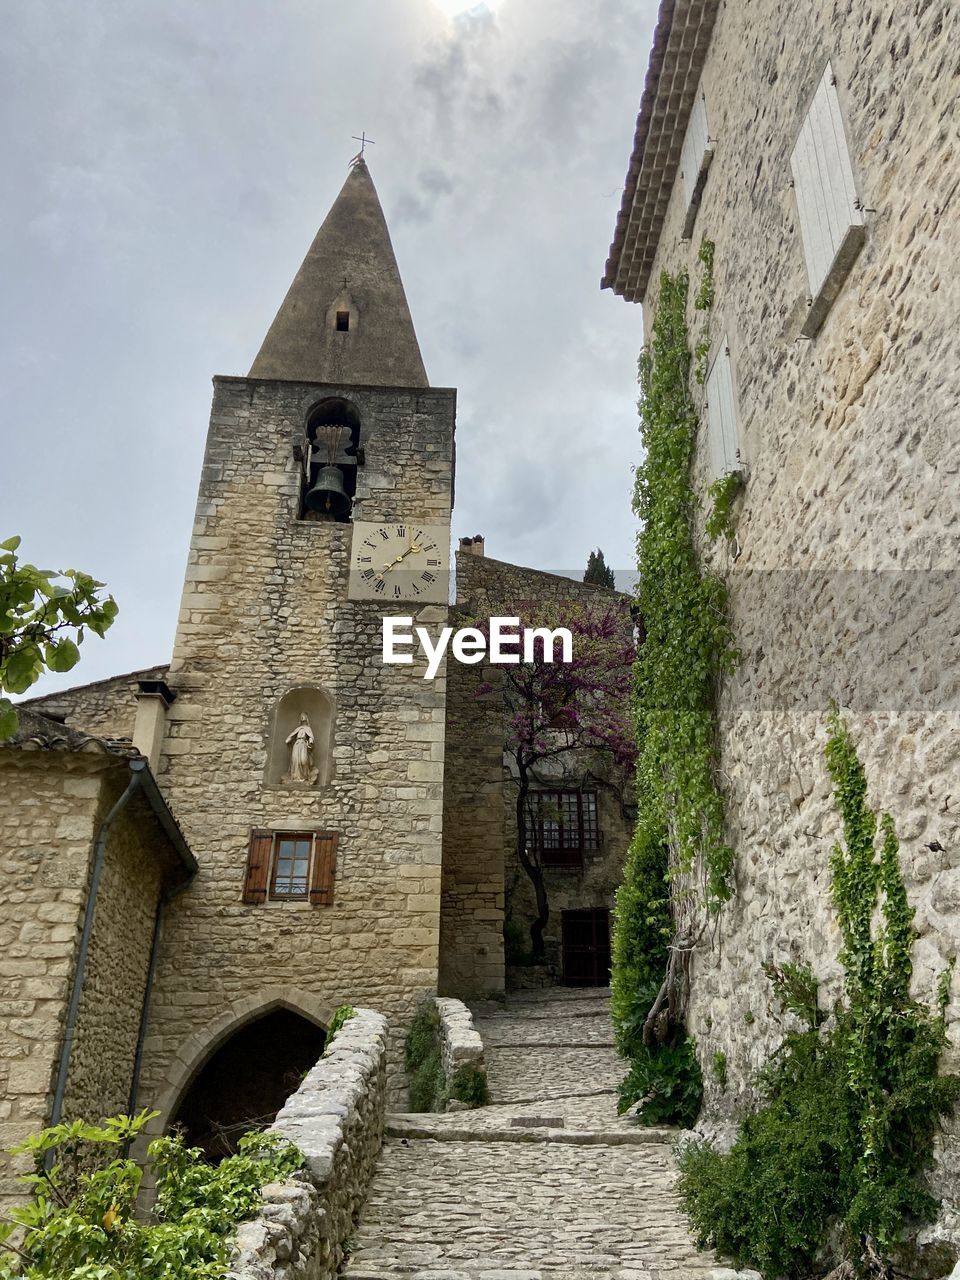 architecture, built structure, building exterior, building, village, history, the past, nature, place of worship, religion, tower, sky, château, plant, no people, estate, travel destinations, cloud, old, stone material, belief, house, wall, spirituality, outdoors, tree, medieval, day, low angle view, travel, residential district, castle, tourism, rural area, cottage, wall - building feature